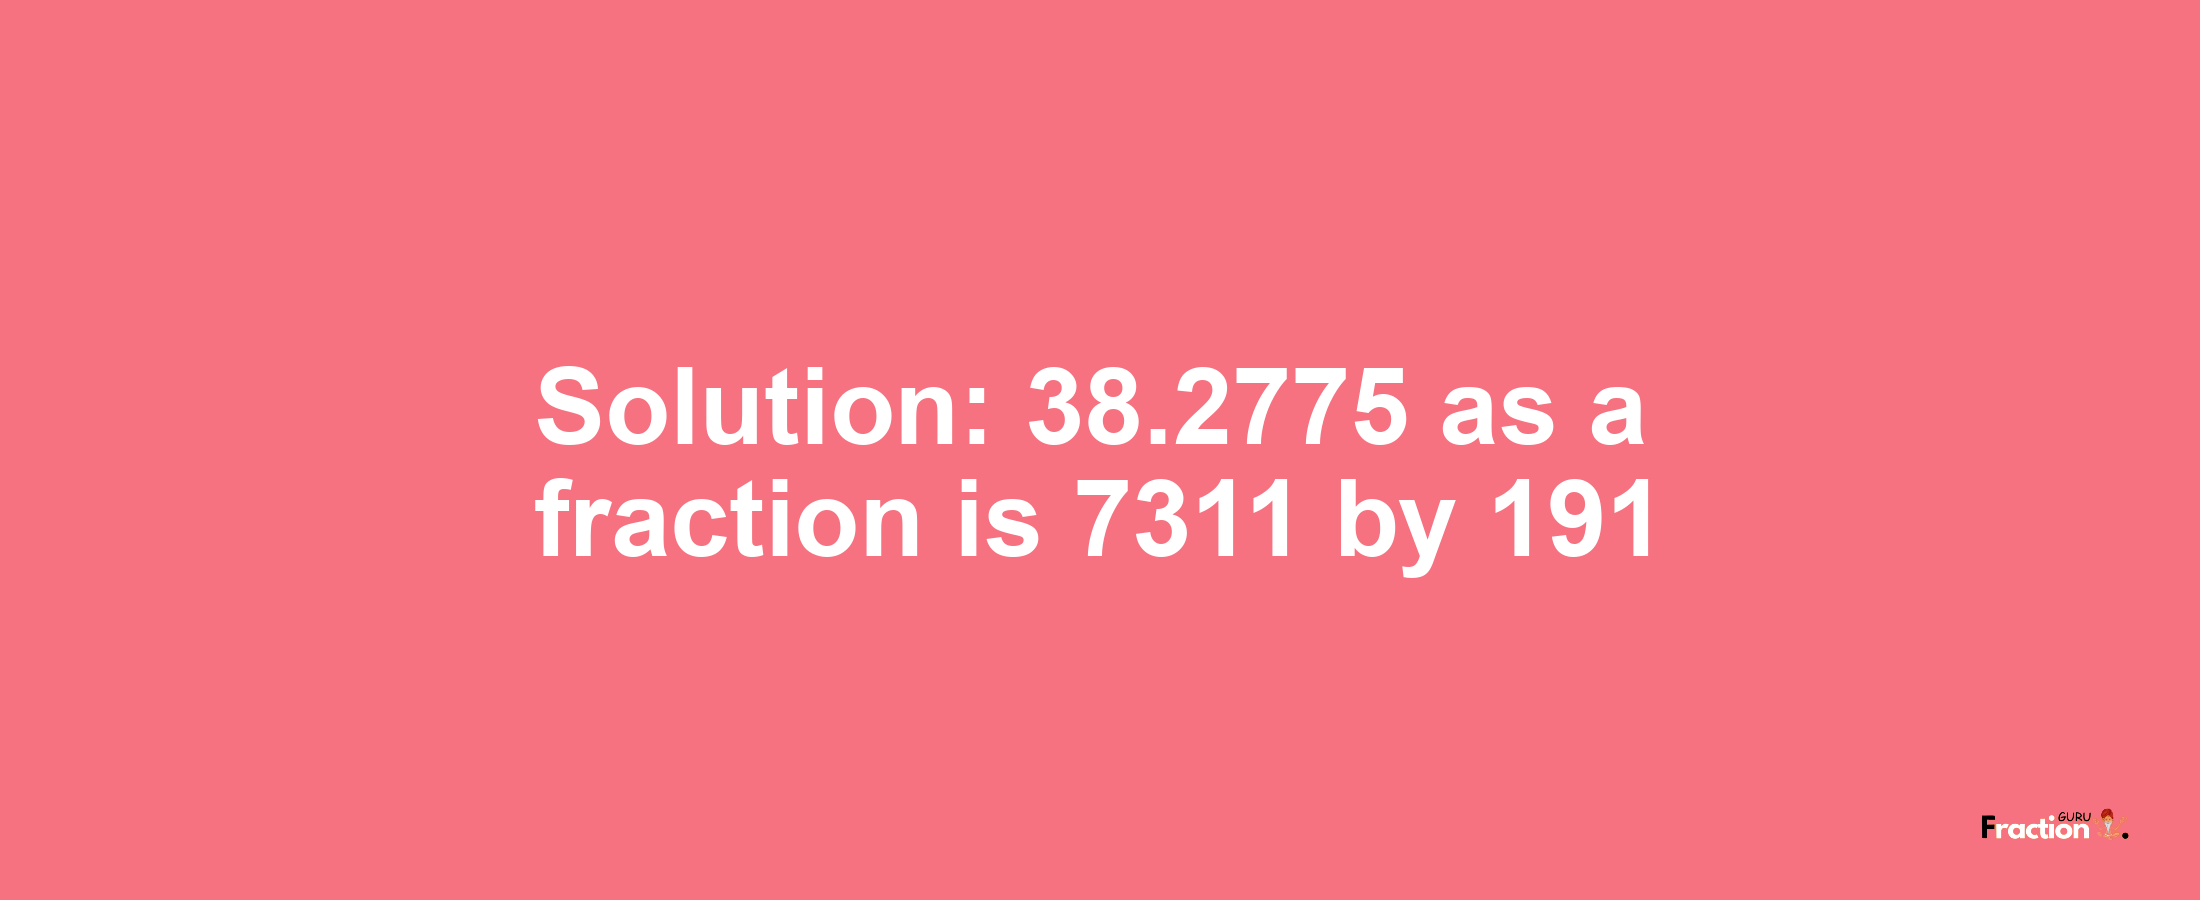 Solution:38.2775 as a fraction is 7311/191